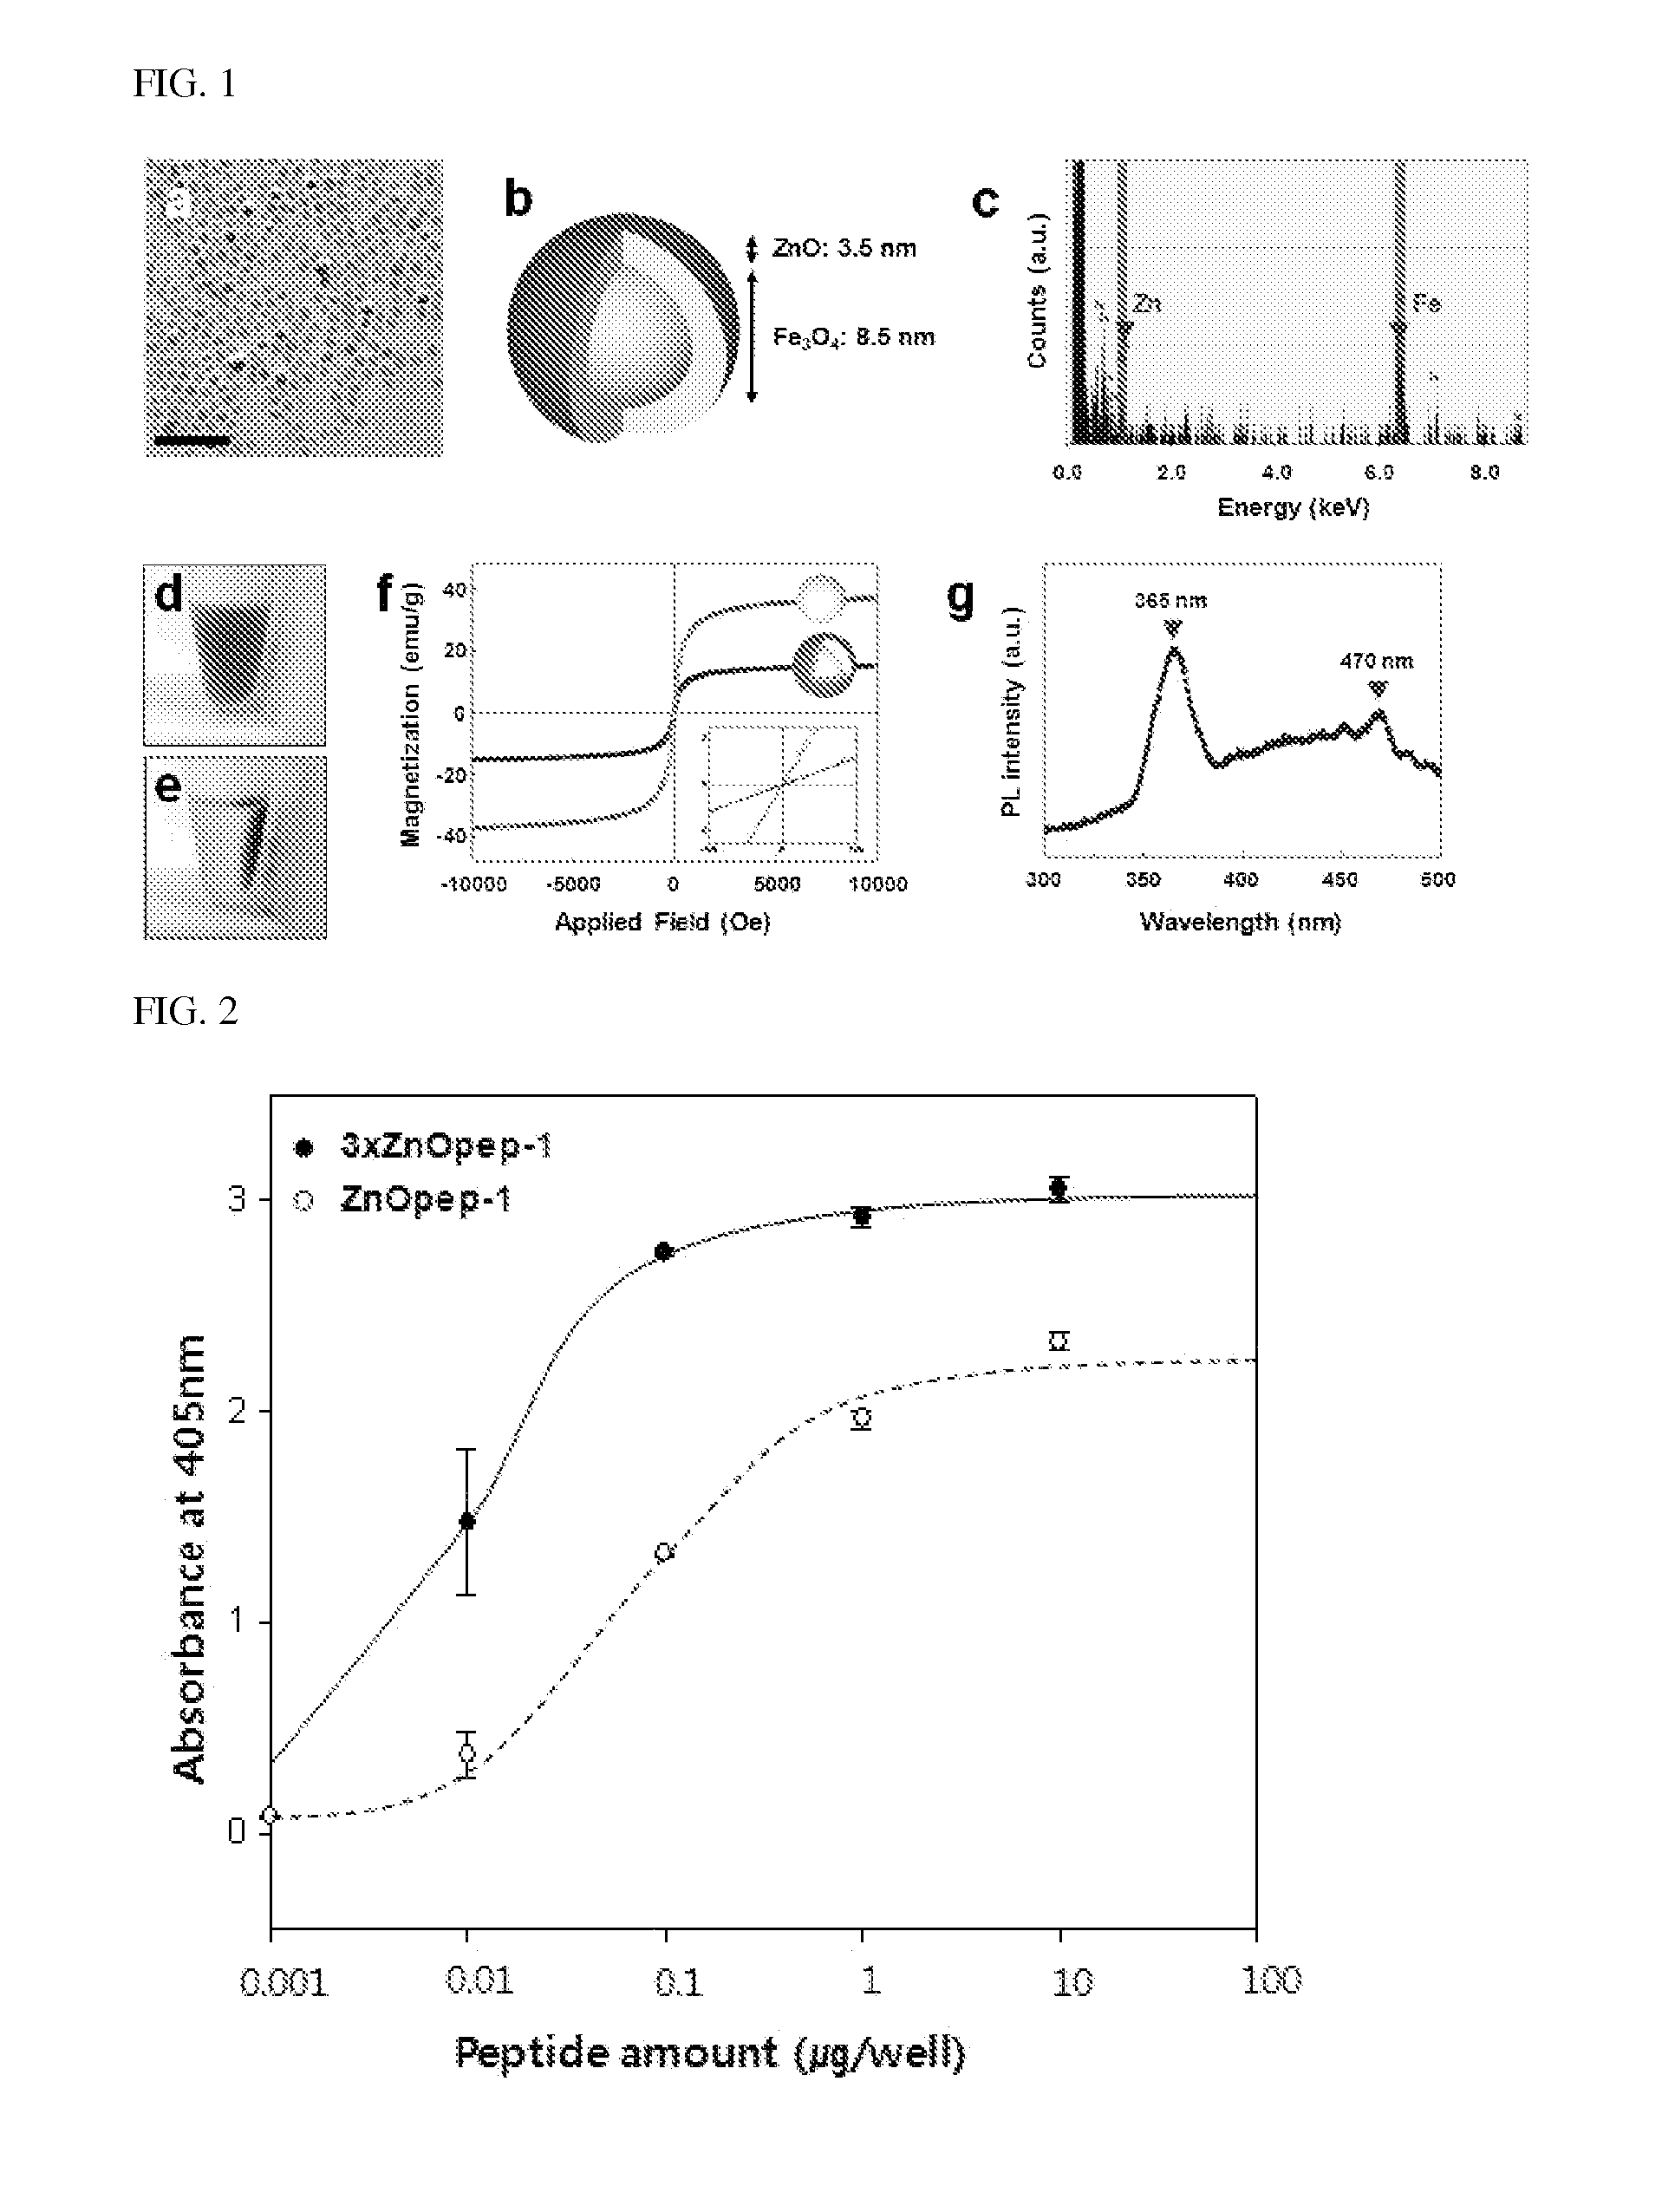 Complex of a protein comprising zinc oxide-binding peptides and zinc oxide nanoparticles, and use thereof